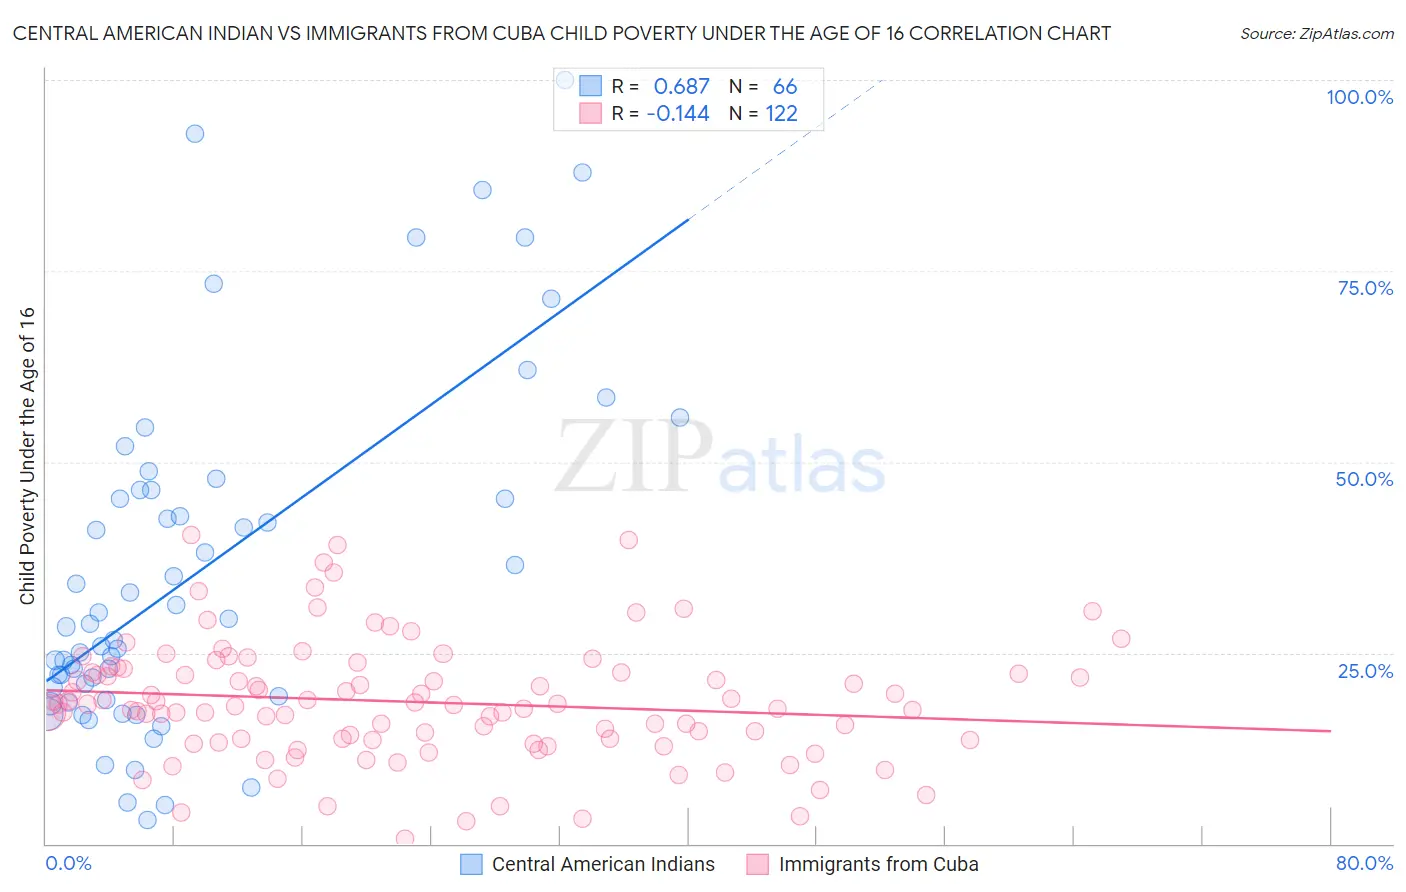 Central American Indian vs Immigrants from Cuba Child Poverty Under the Age of 16